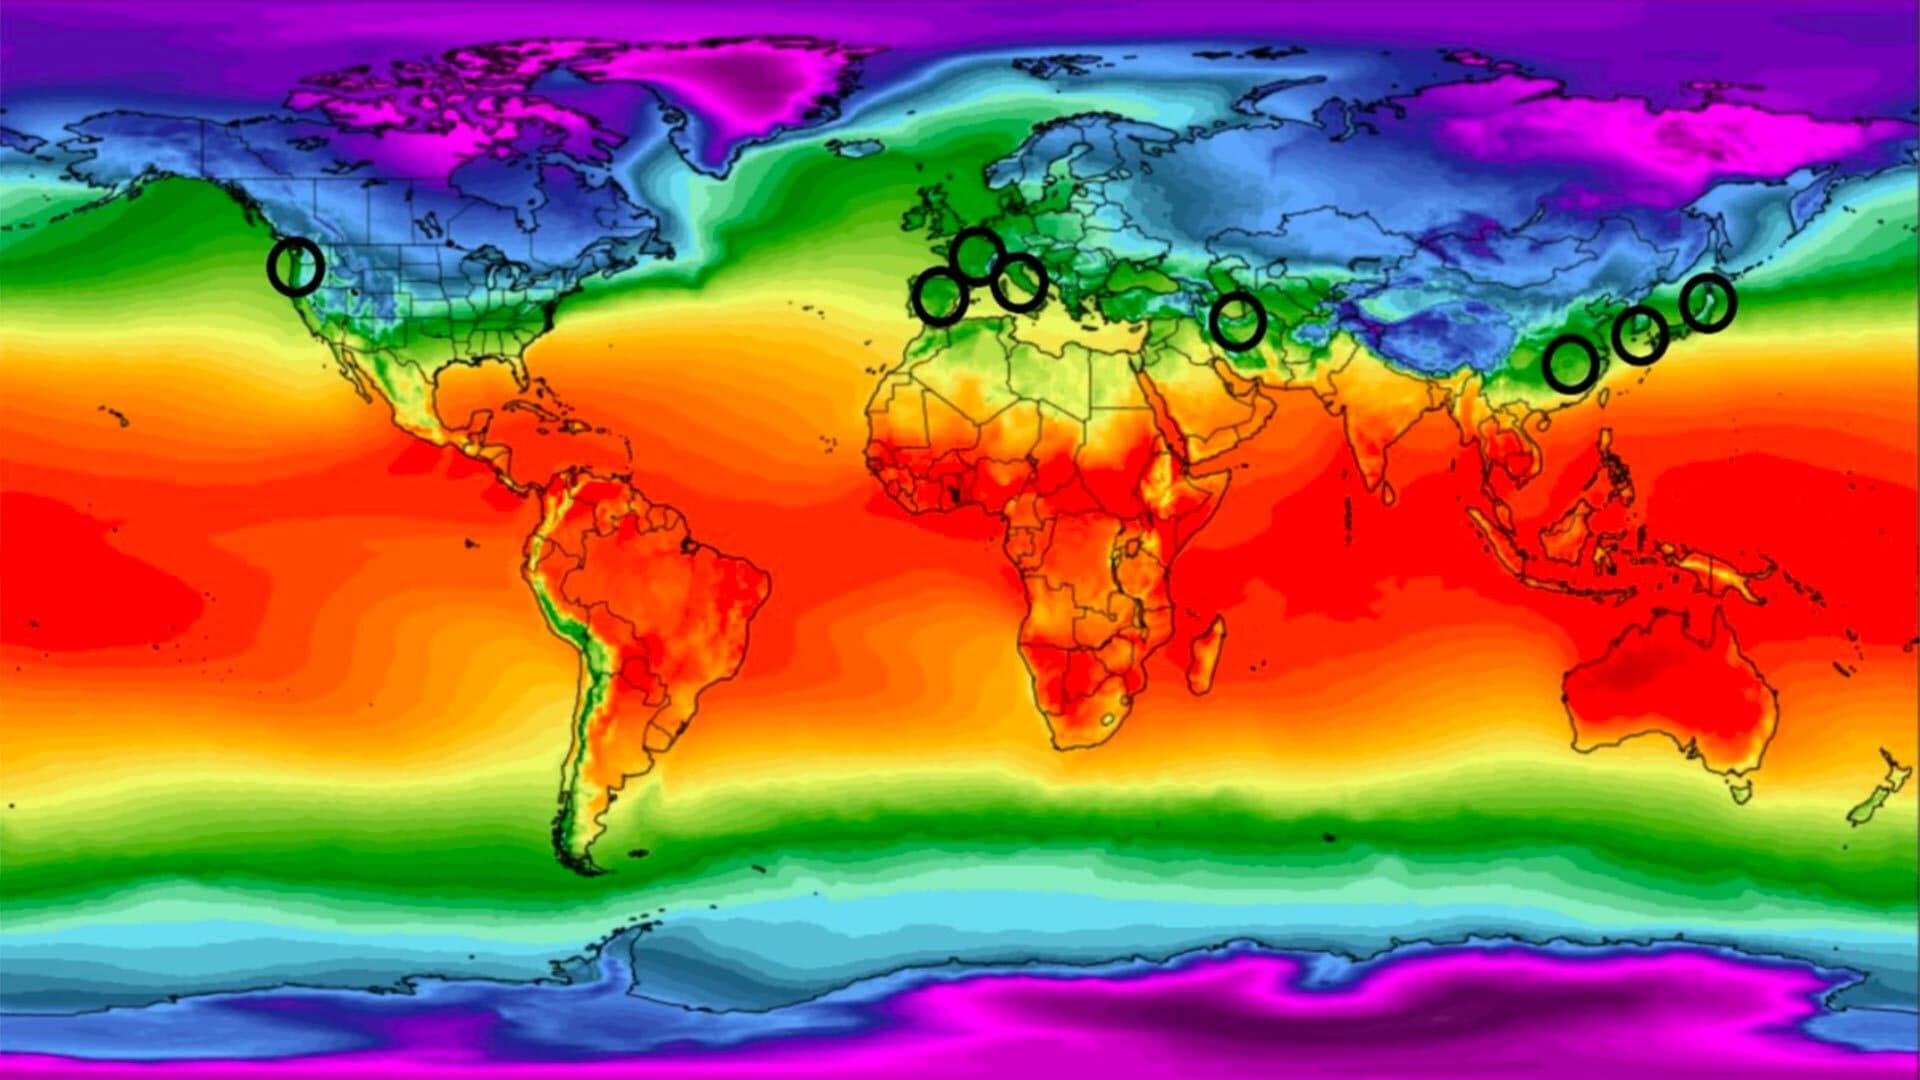 A world temperature map shows warmer (red) to cooler (violet) temperatures, with black circles representing areas of significant community transmission of COVID-19.